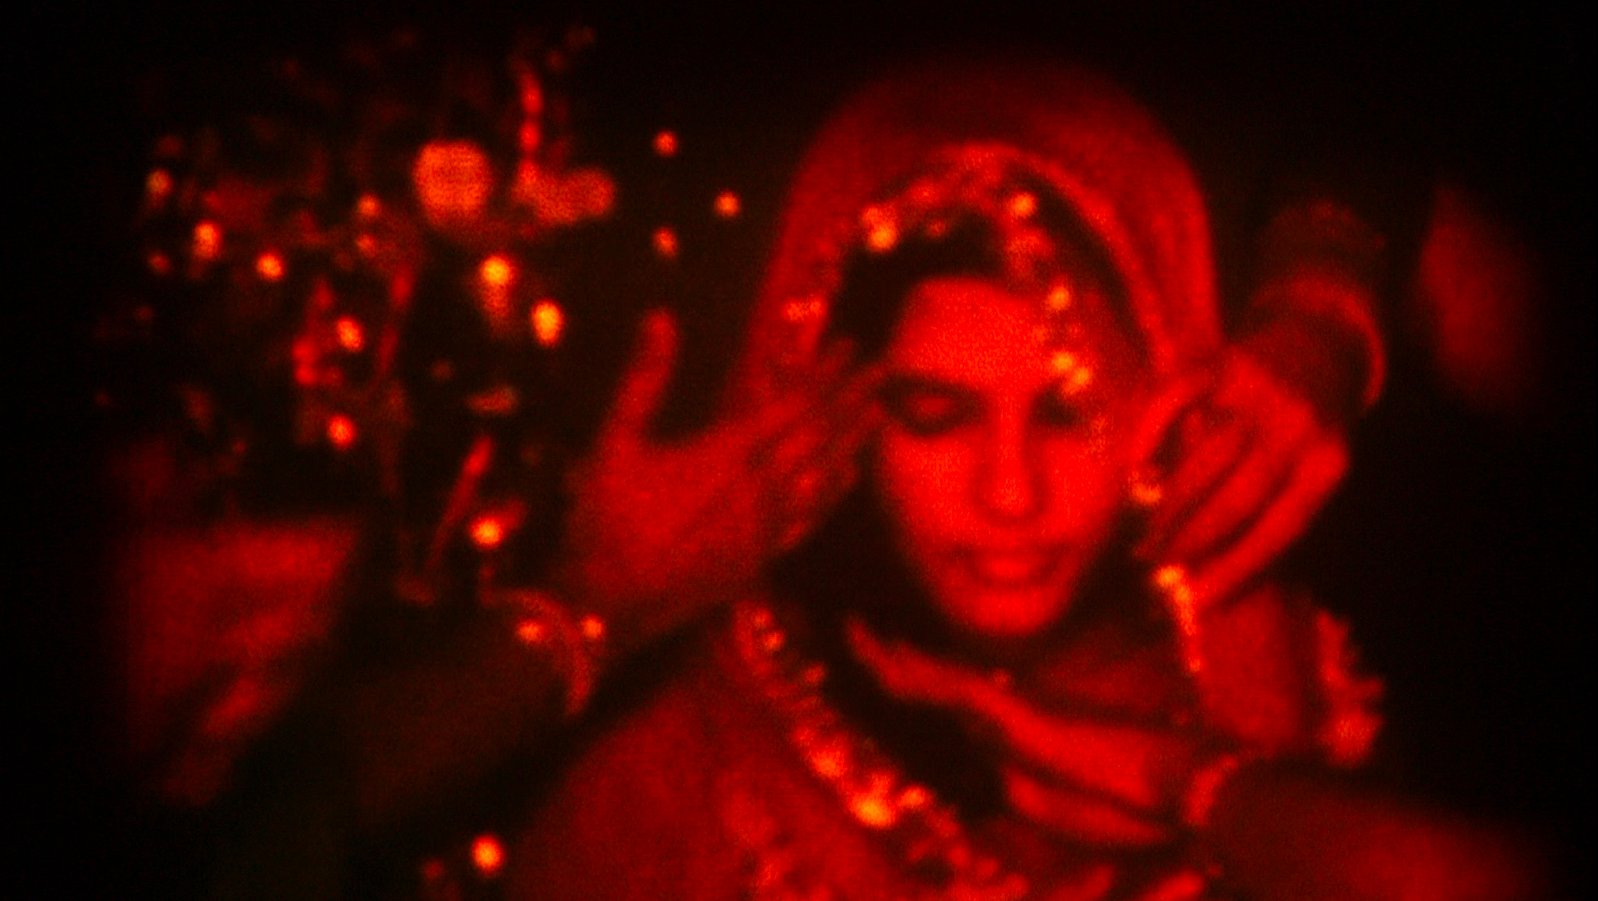 An image of a woman in a sari and veil, with hands surrounding her veil as she looks down